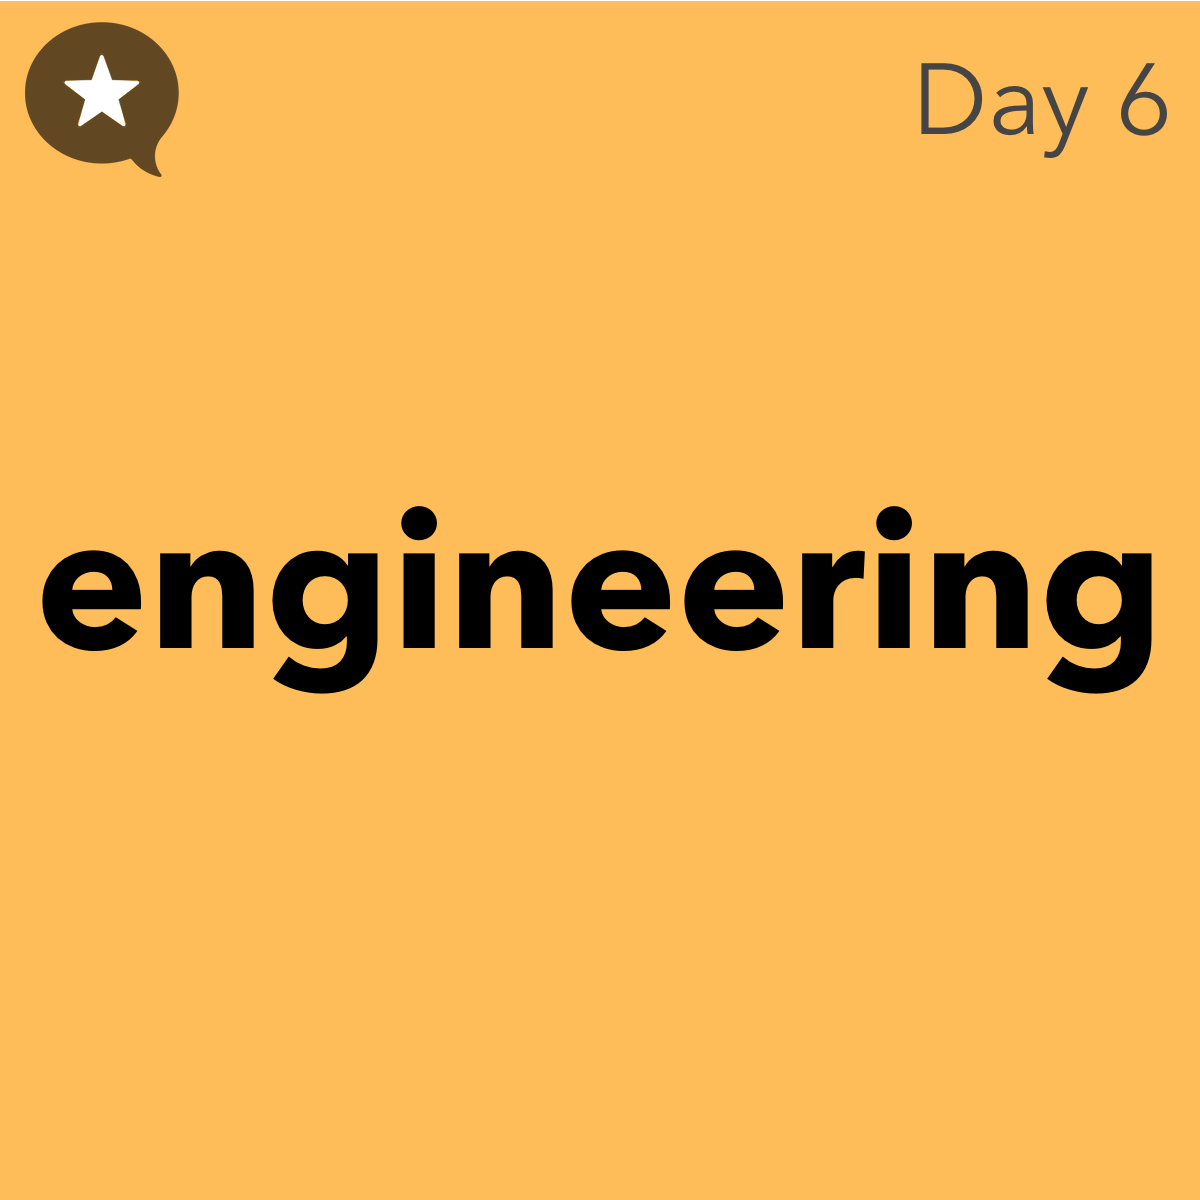 Day 6 graphic: engineering